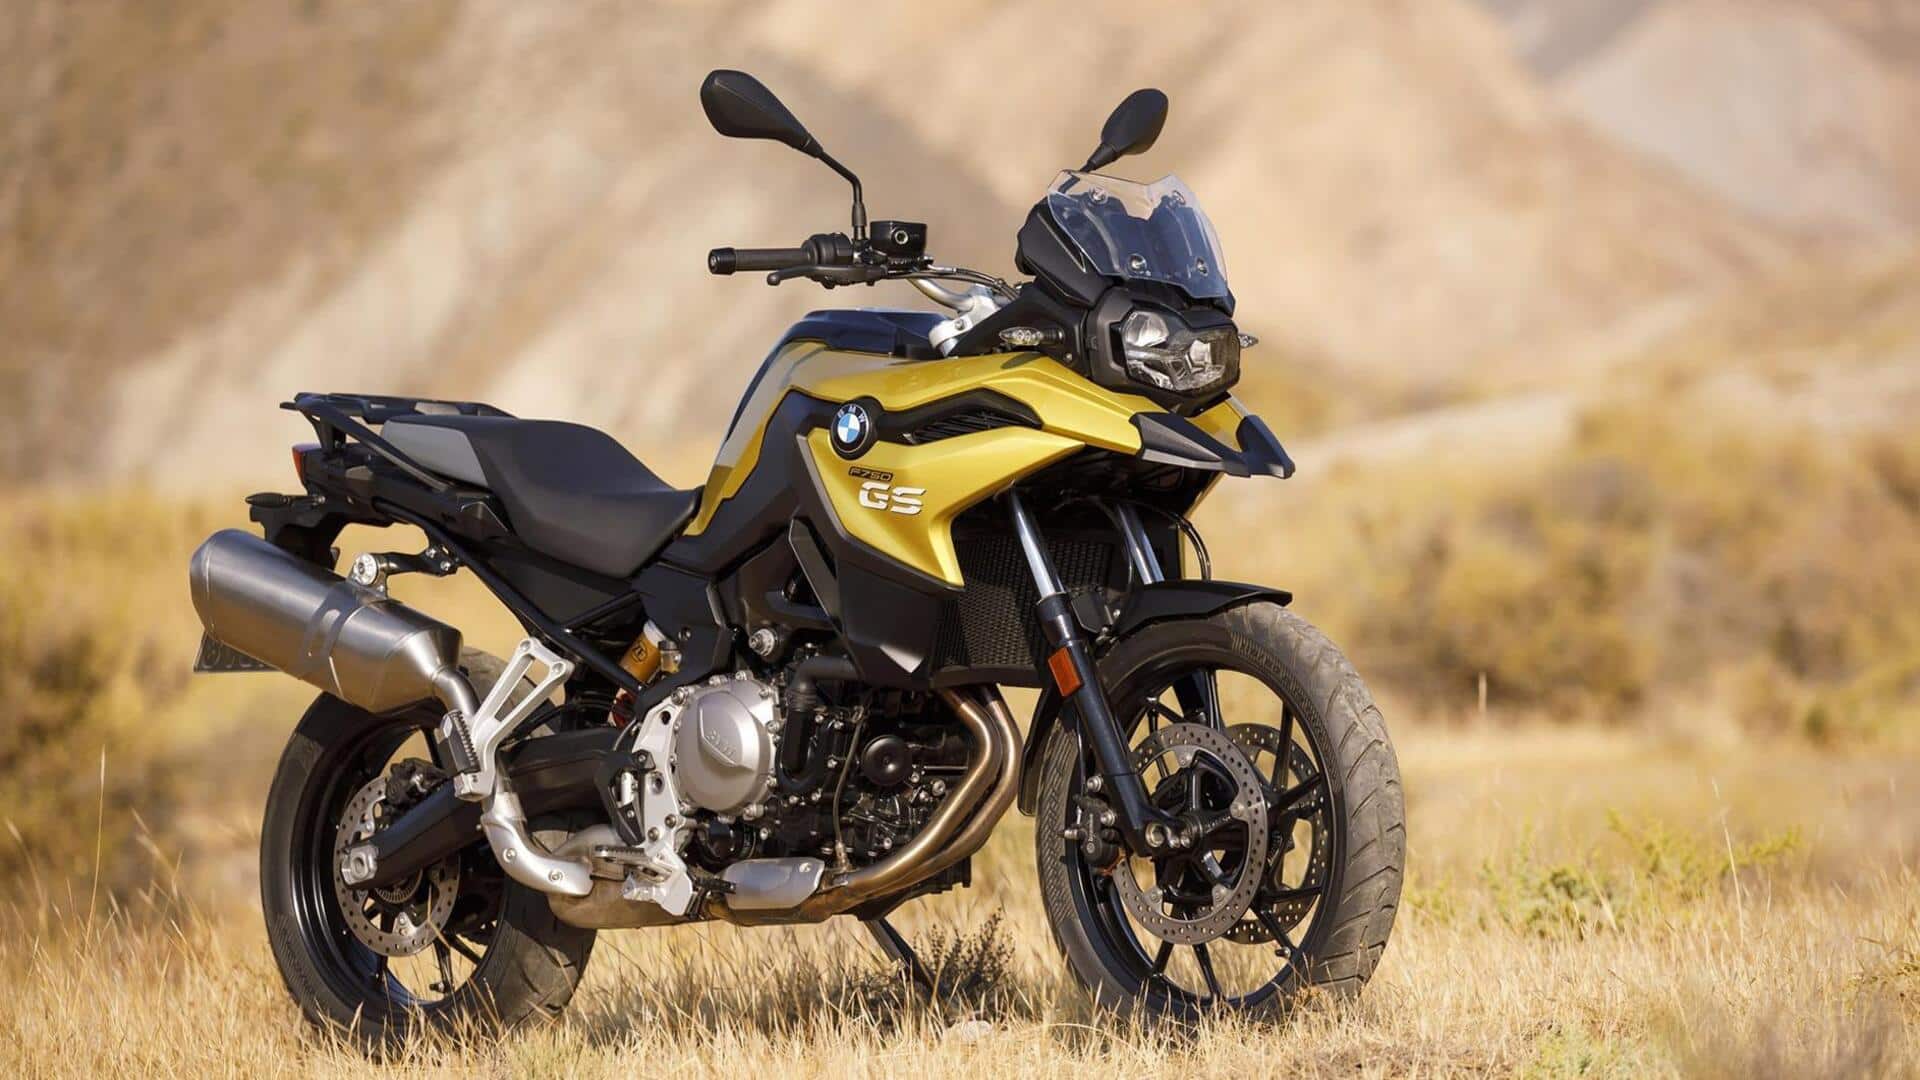 BMW F 900 GS to debut tomorrow: What to expect